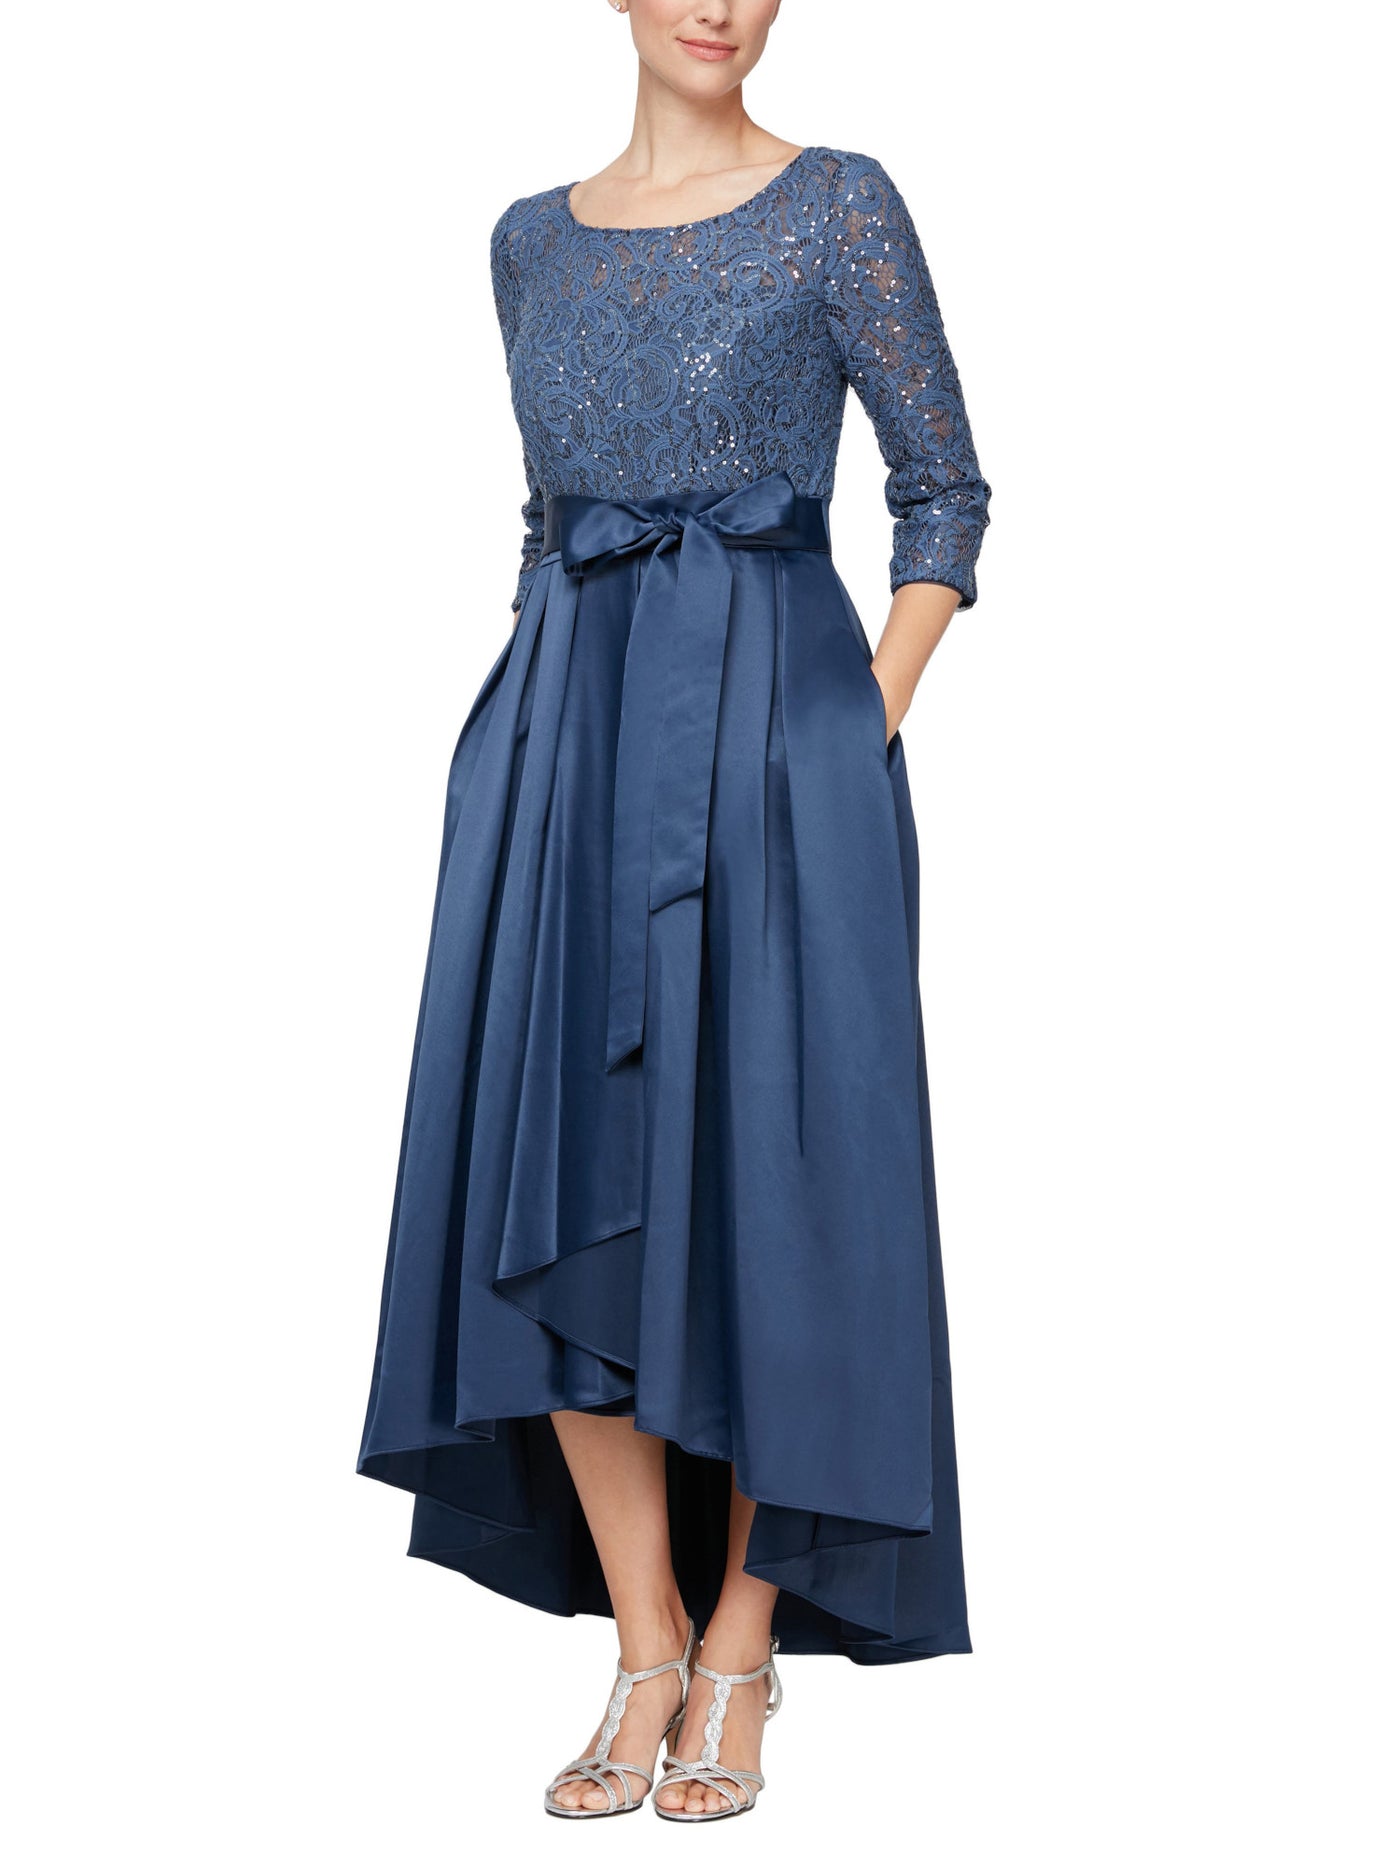 ALEX EVENINGS Womens Blue Zippered Sequined Gown Lace Tie Unlined Padded 3/4 Sleeve Round Neck Full-Length Evening Hi-Lo Dress 10